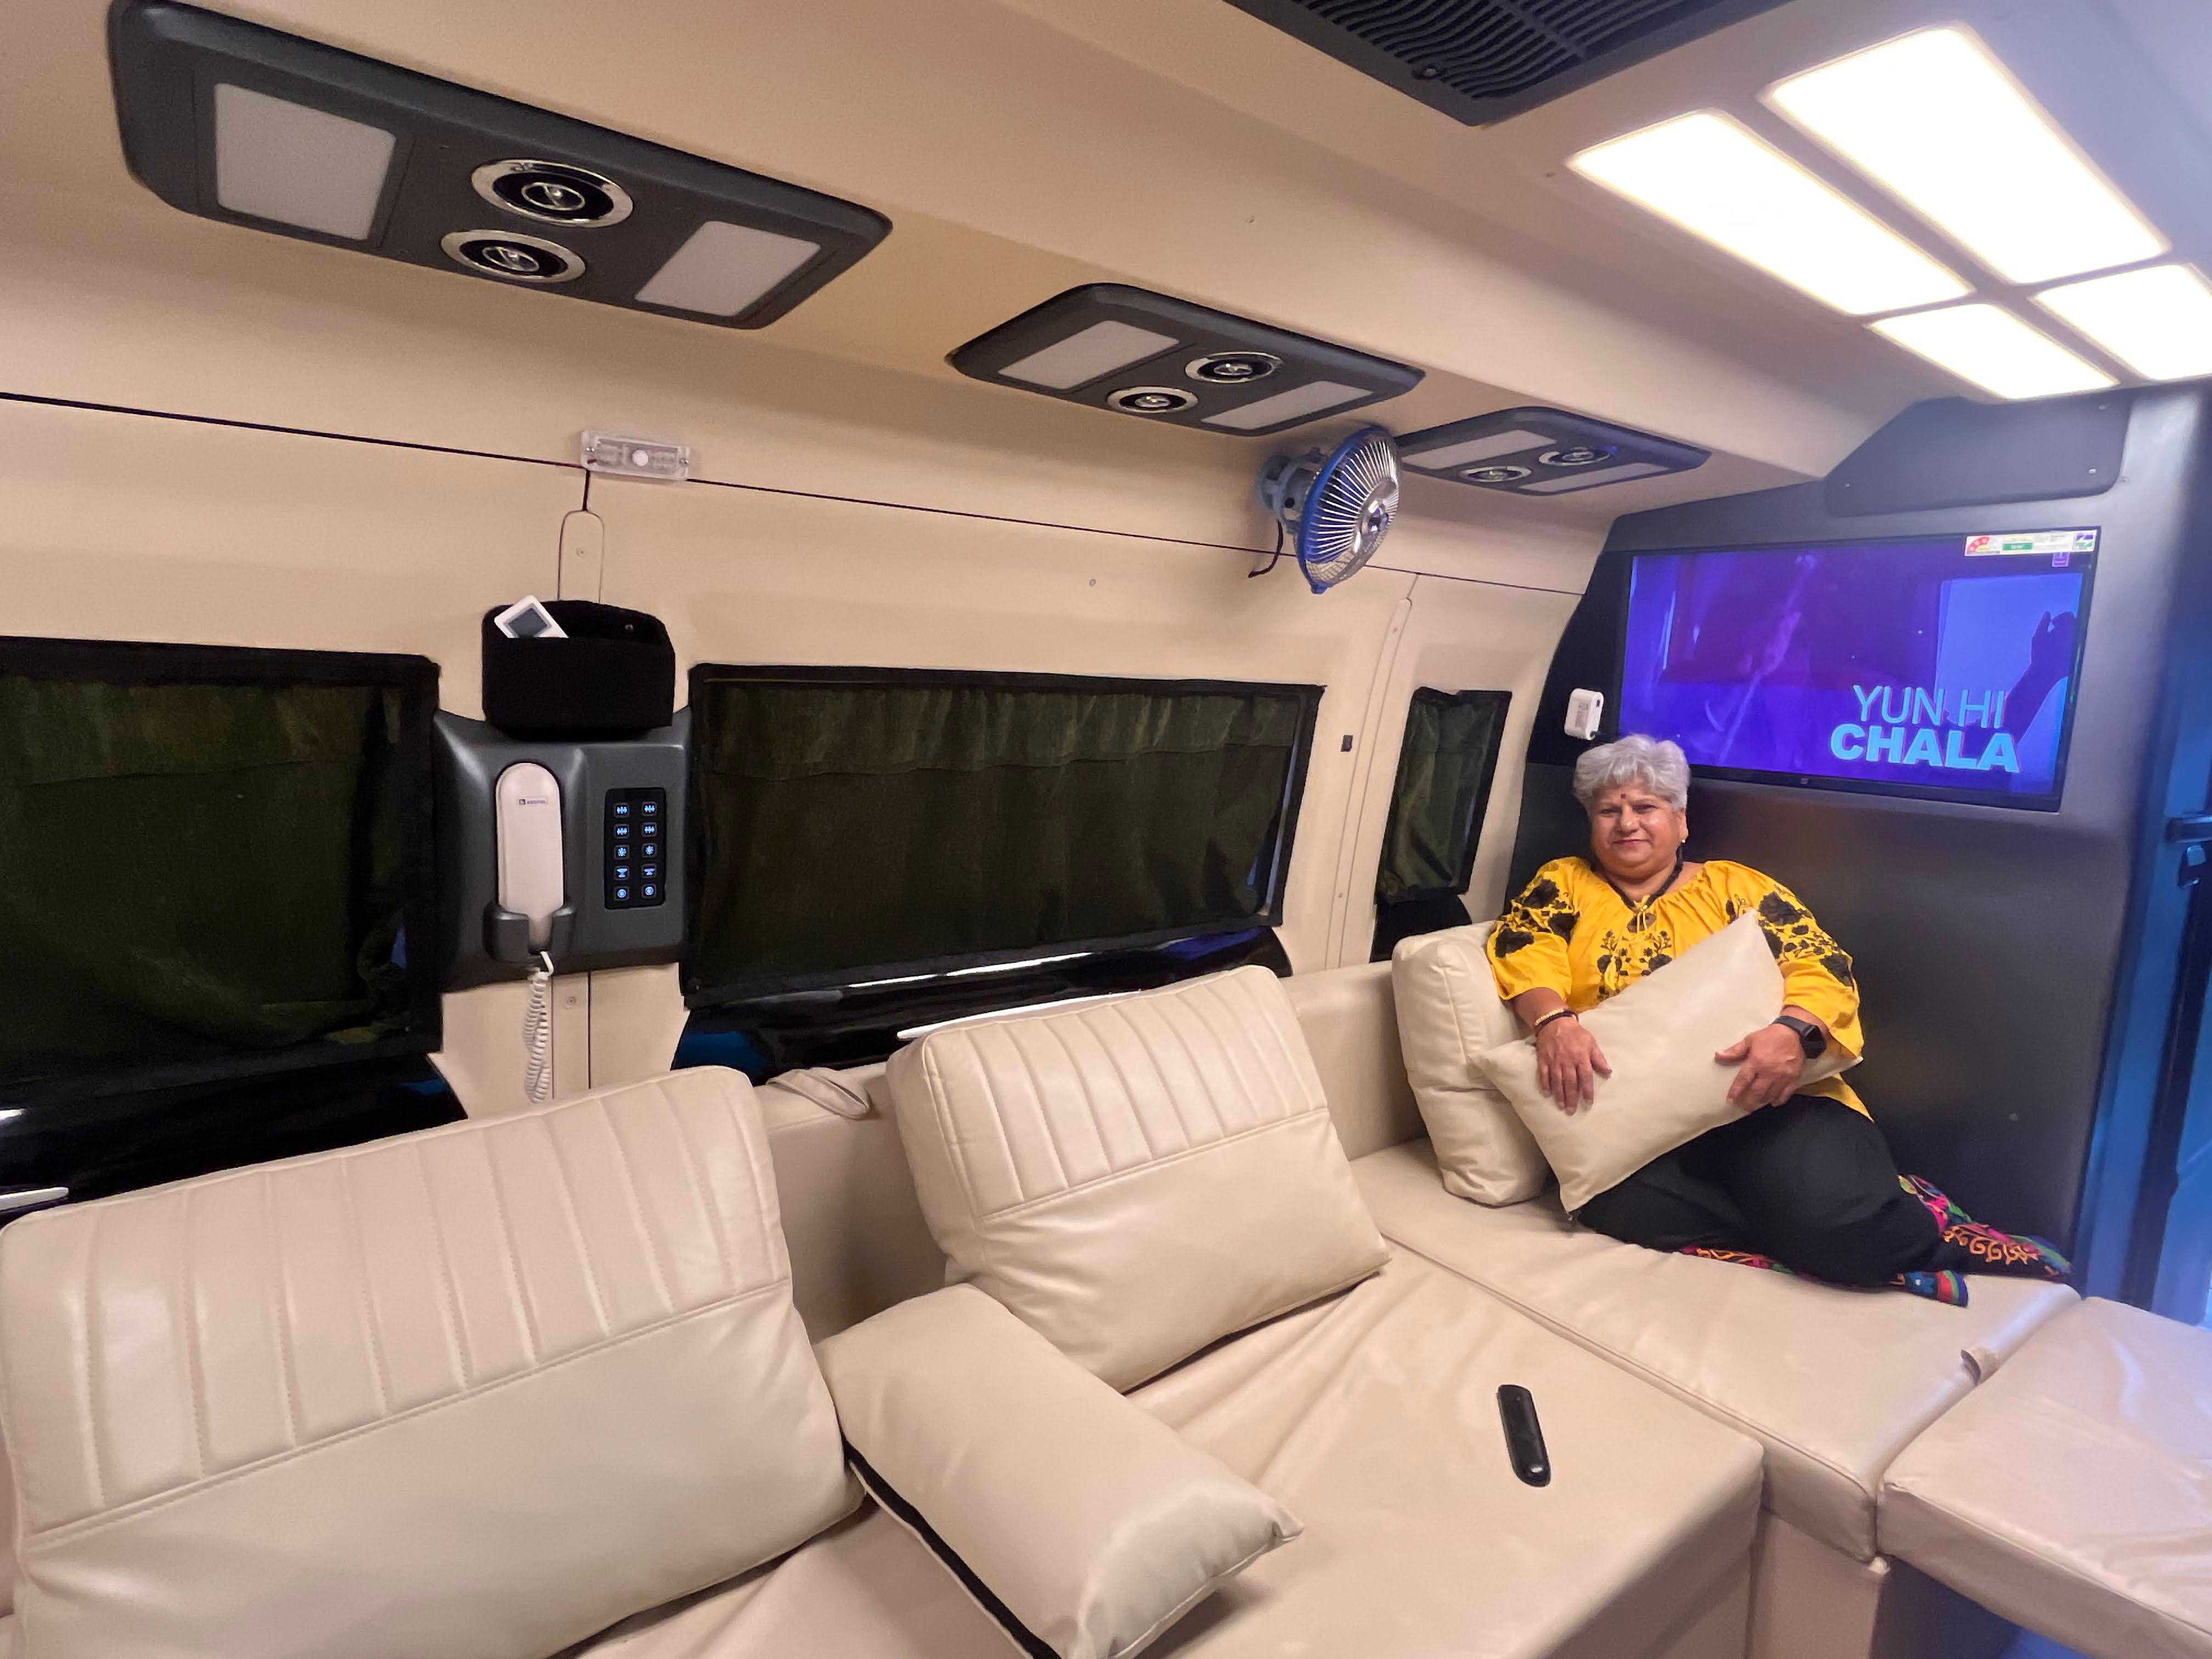 <i><b>The caravan comes equipped with an entertainment system, mood lighting, comfortable sofa cum beds and lots of storage</b></i>